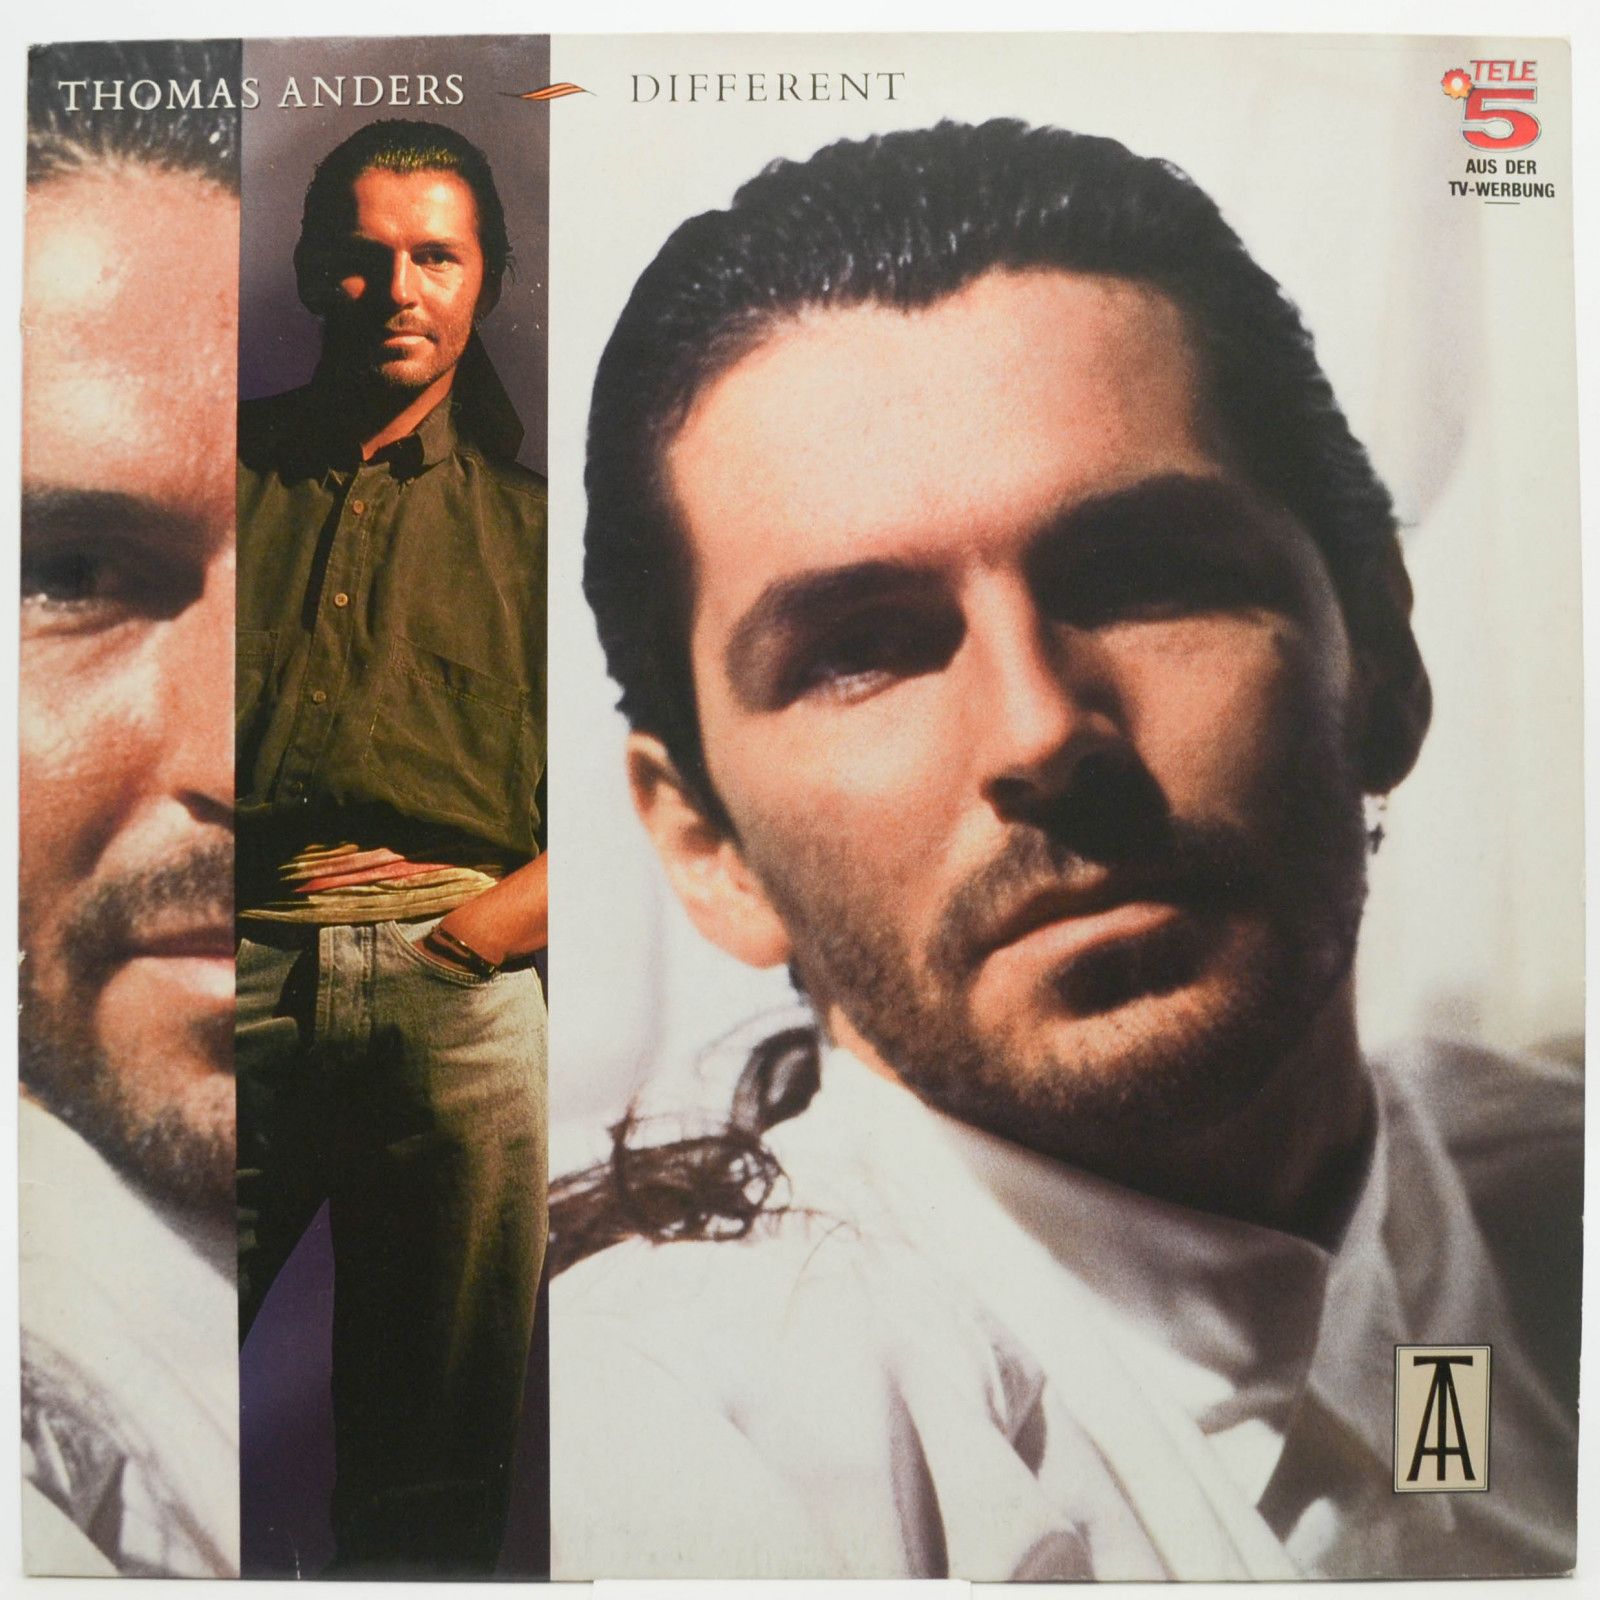 Thomas Anders — Different, 1989